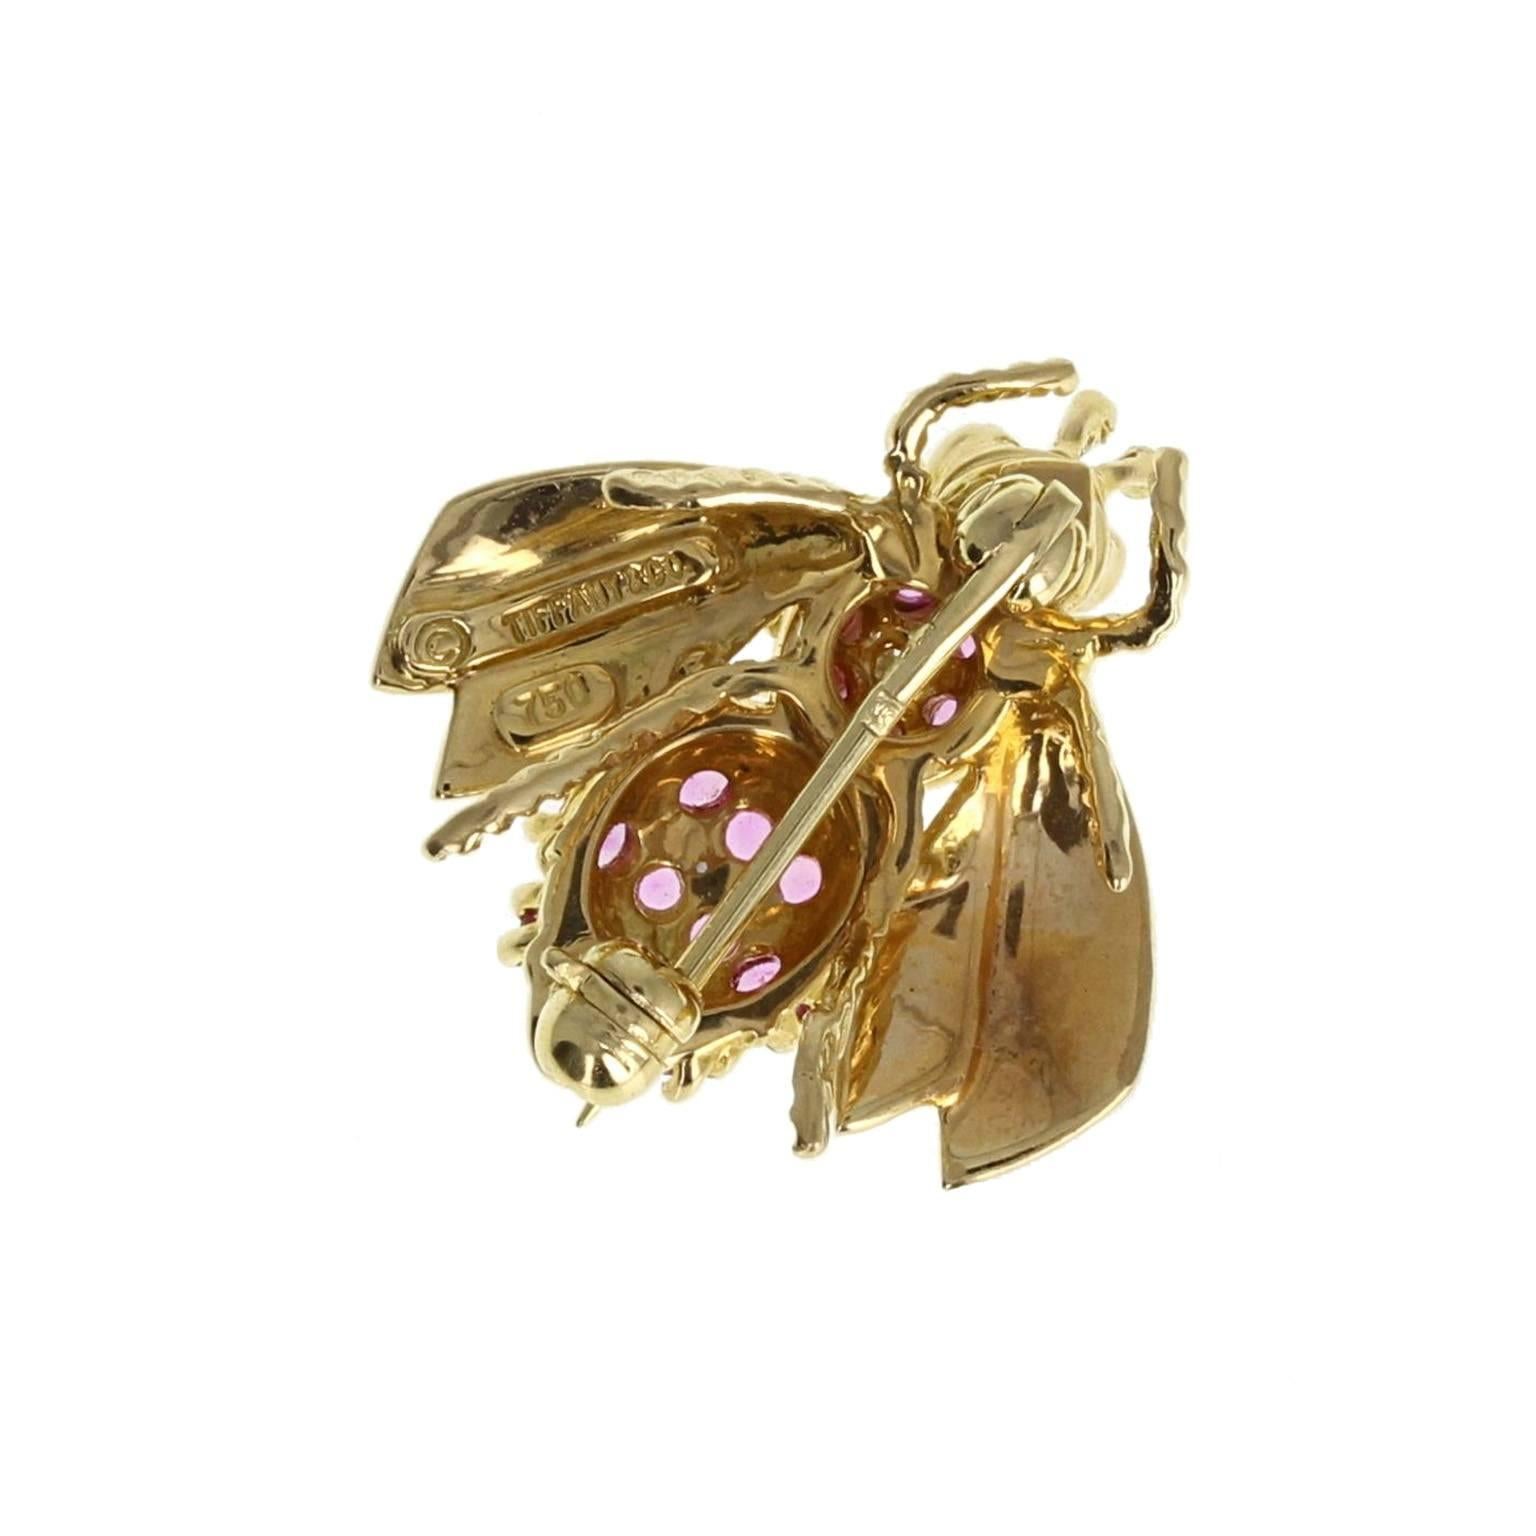 A tiny, beautifully formed bee brooch, set with a single brilliant-cut diamond, pink sapphires and two rubies for eyes. Signed Tiffany & Co.
 
Setting
Tests as 18 carat gold
 
Diamond
Weight: 0.10 of a carat
Clarity: VS
Colour: G
